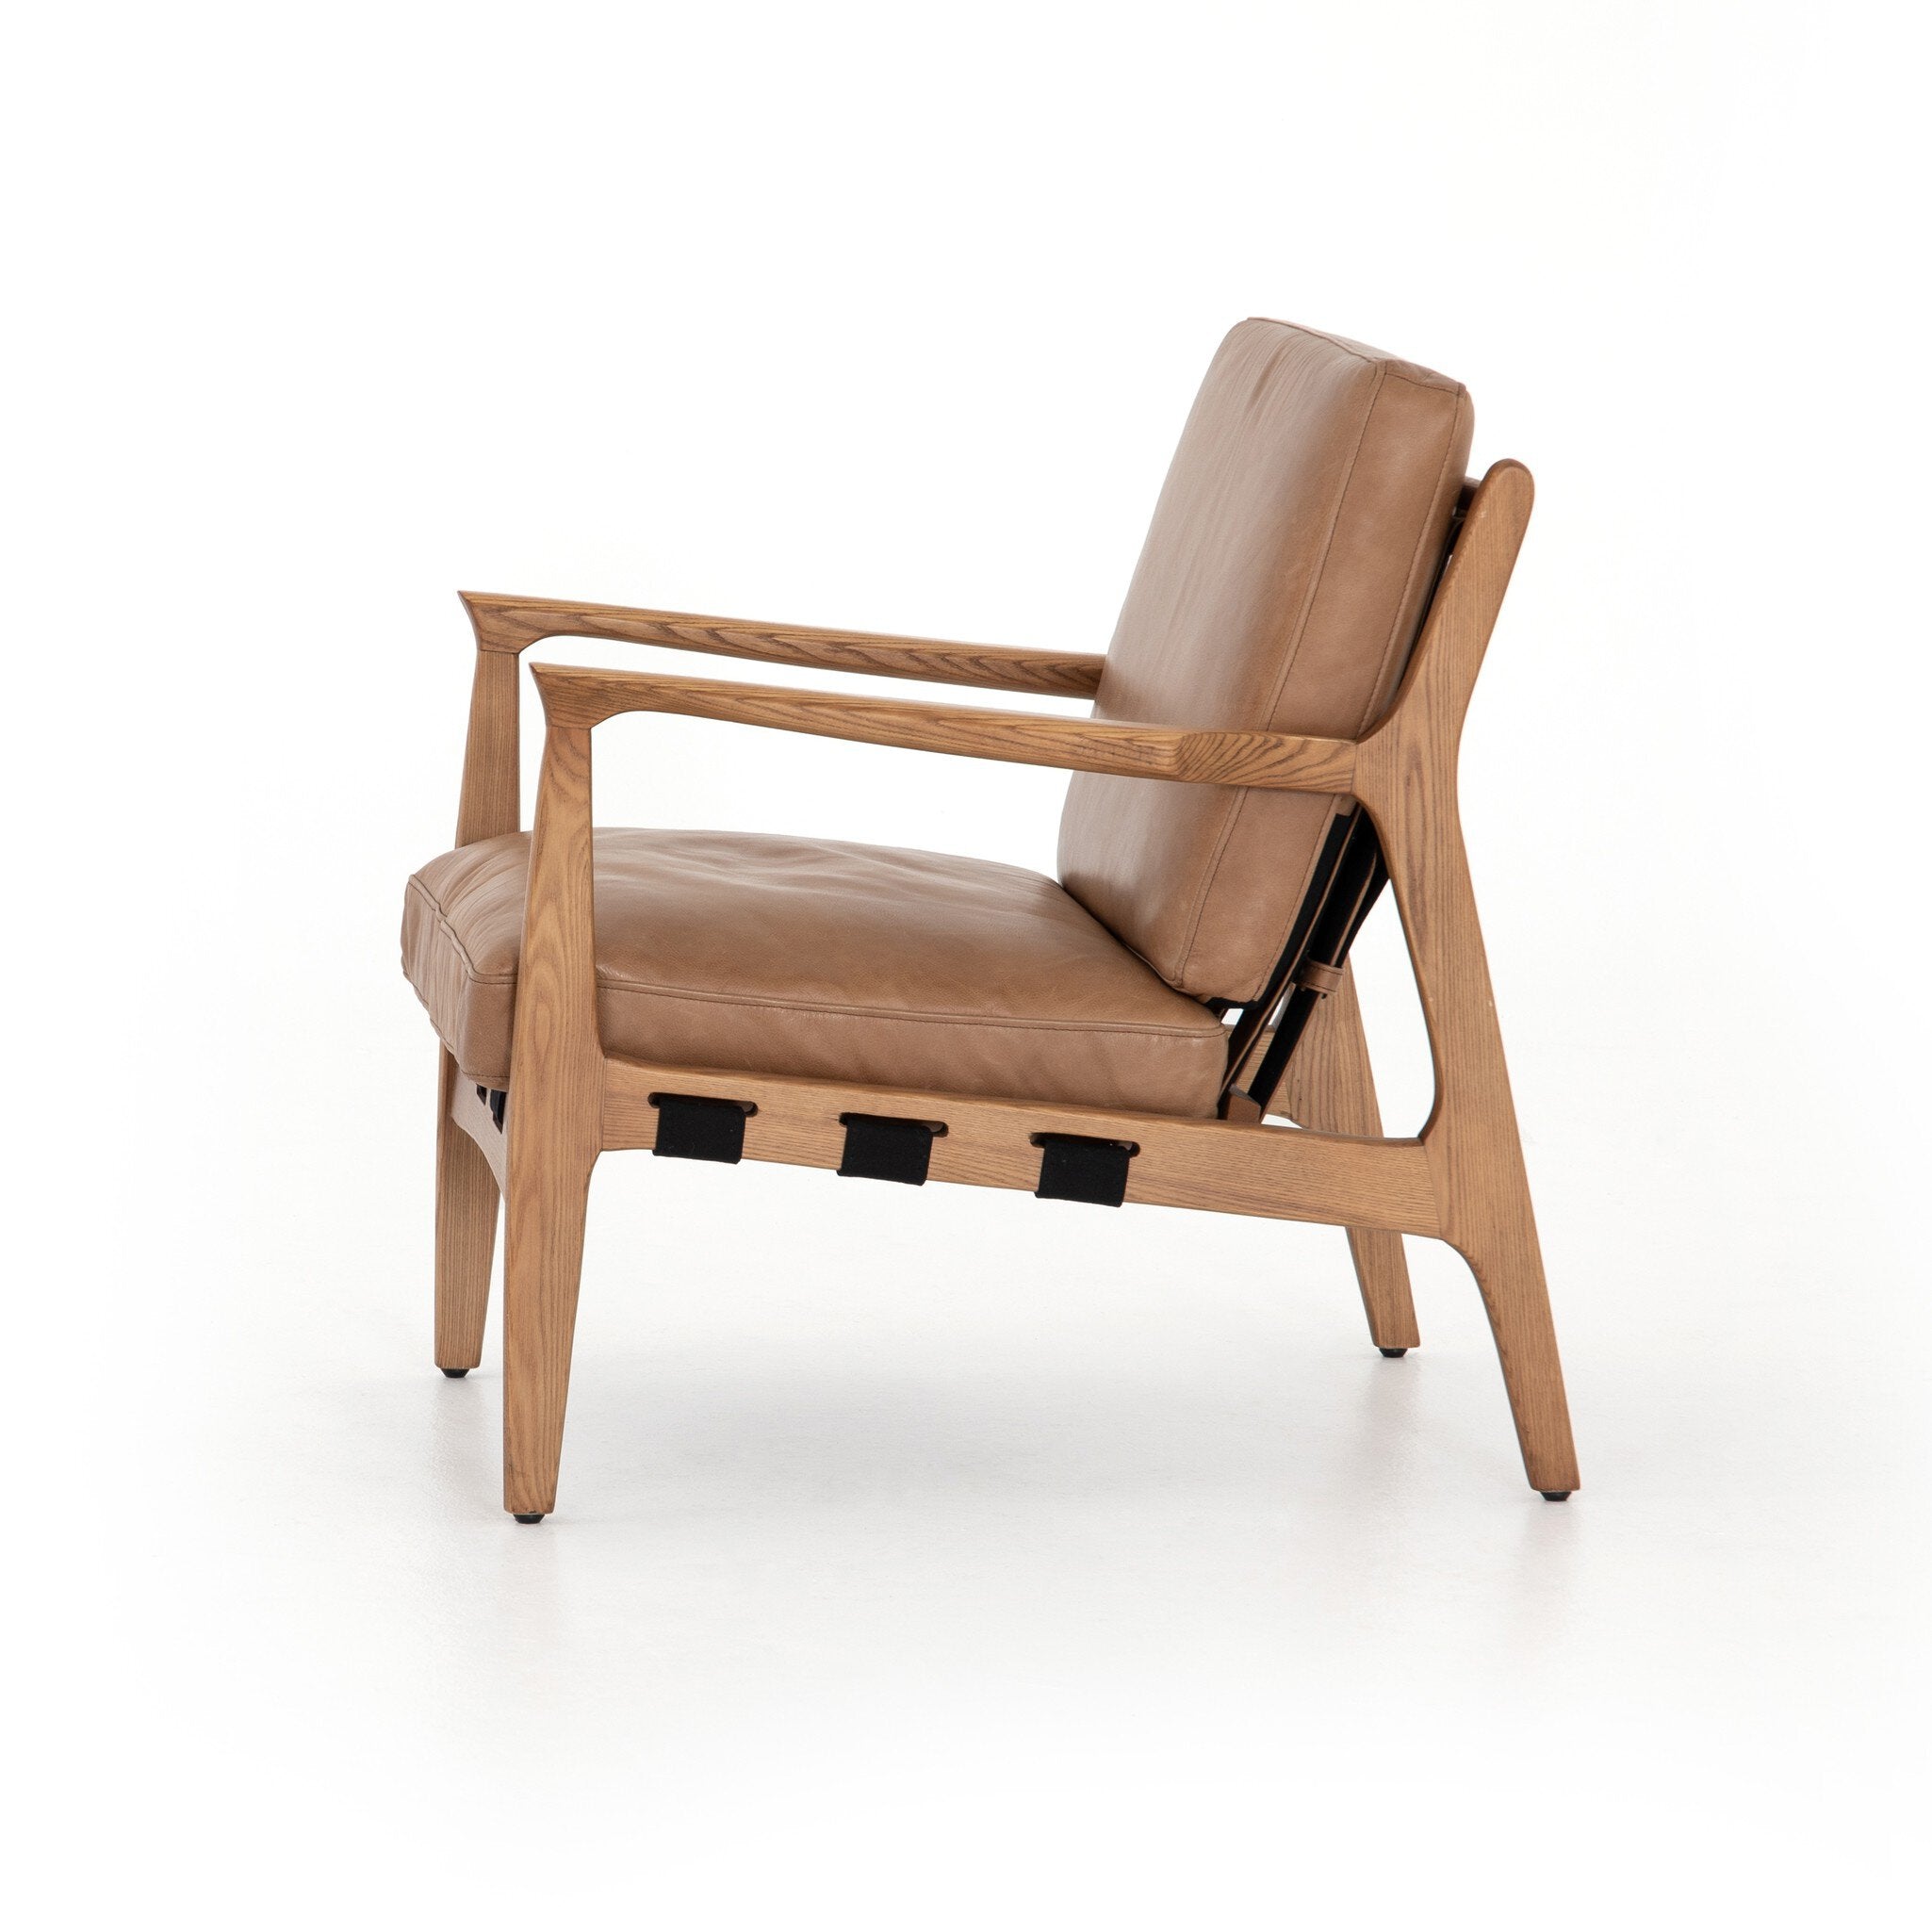 Silas Chair - Patina Copper